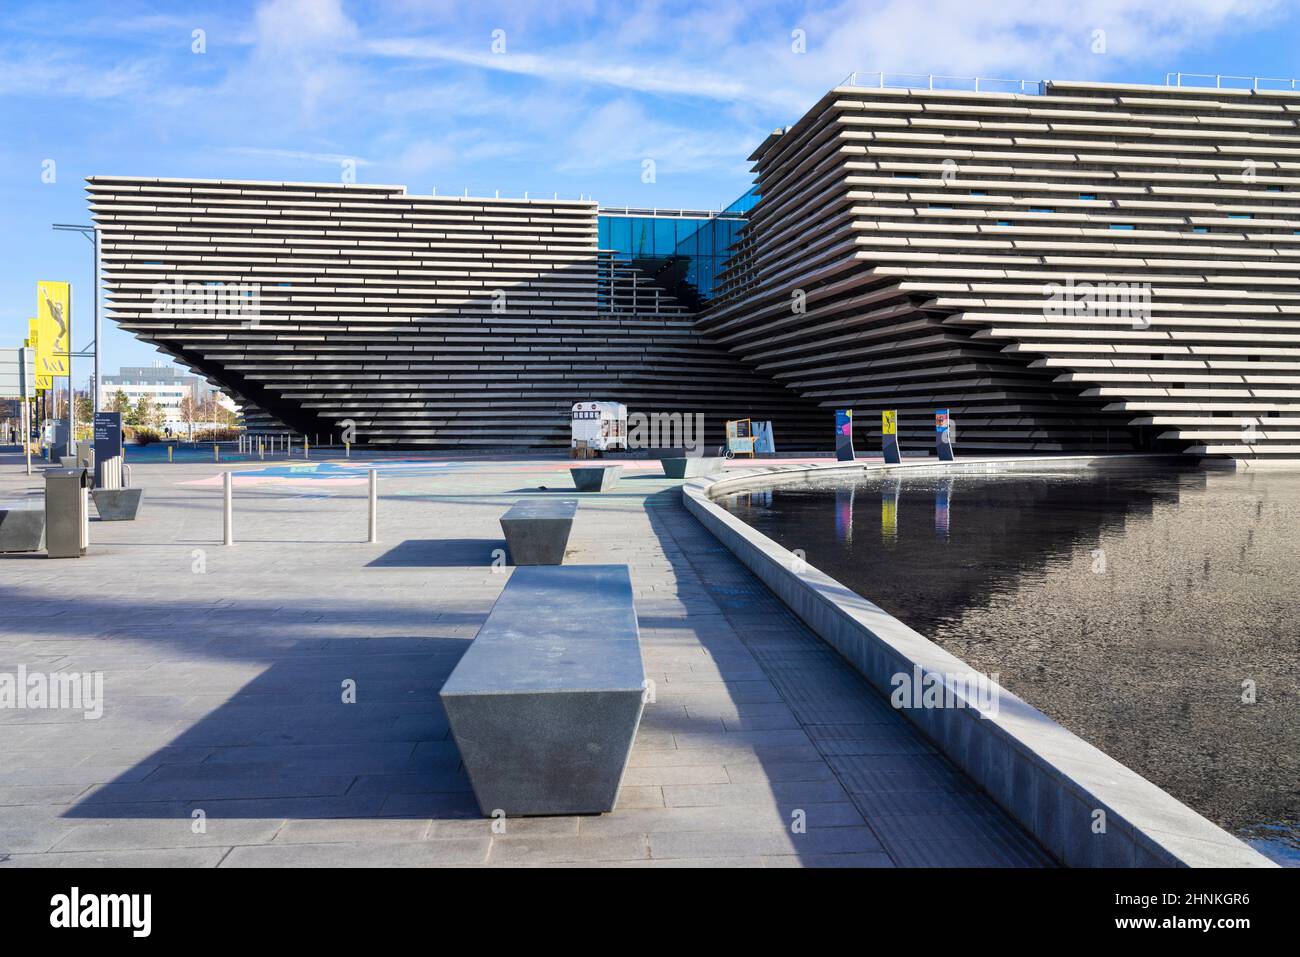 Dundee V&A Dundee Design Museum of Scotland Dundee Waterfront Dundee Riverside Esplanade Dundee Scotland GB Europe Foto Stock